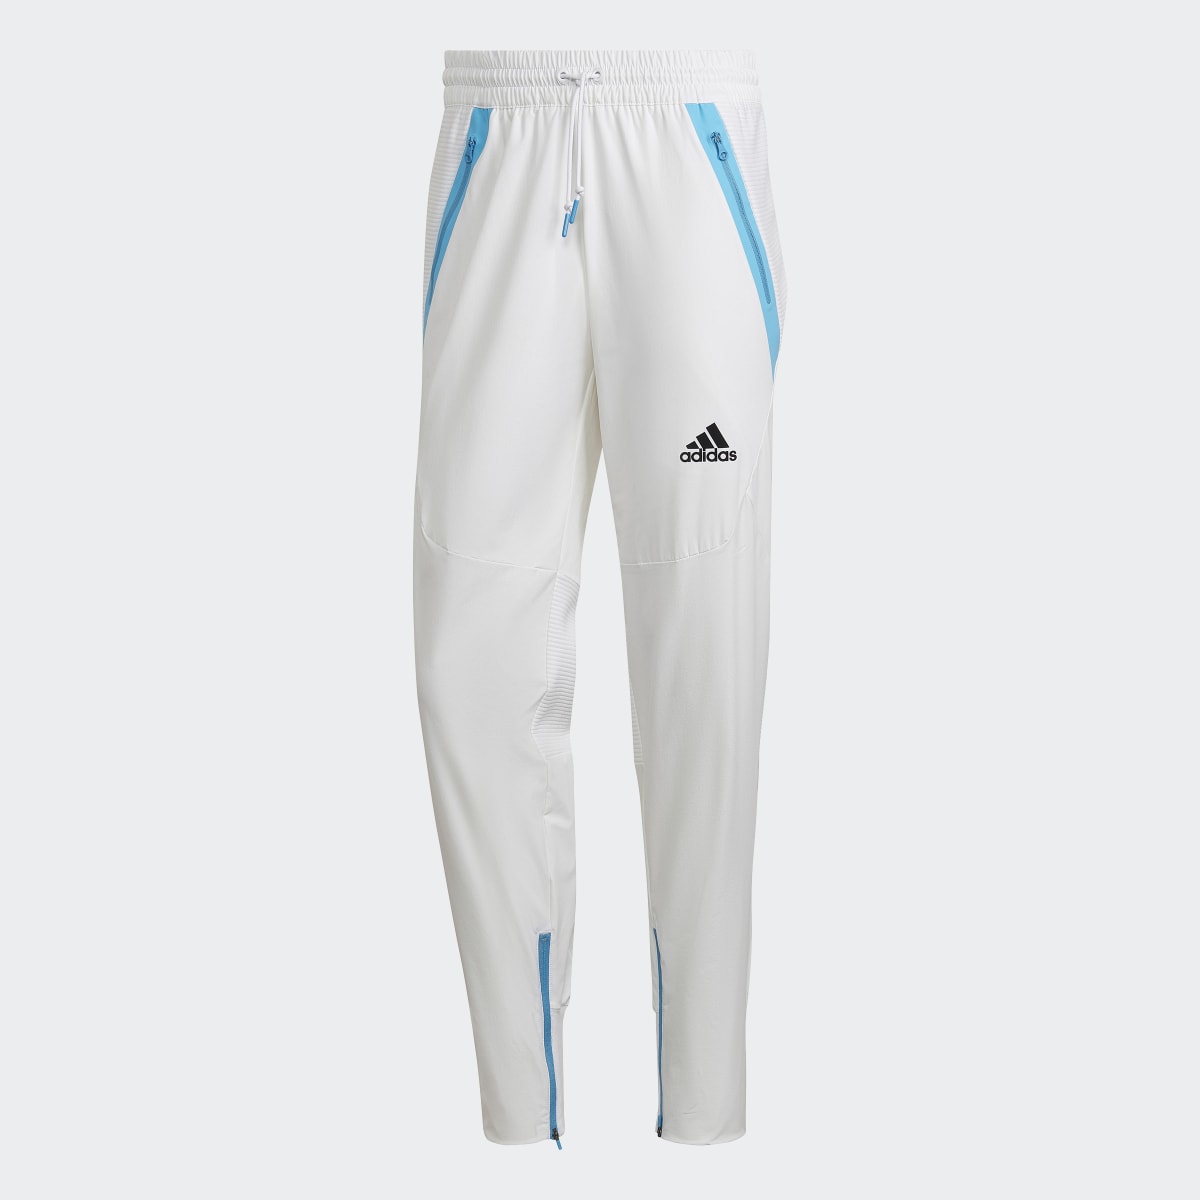 Adidas Designed for Gameday Pants. 5